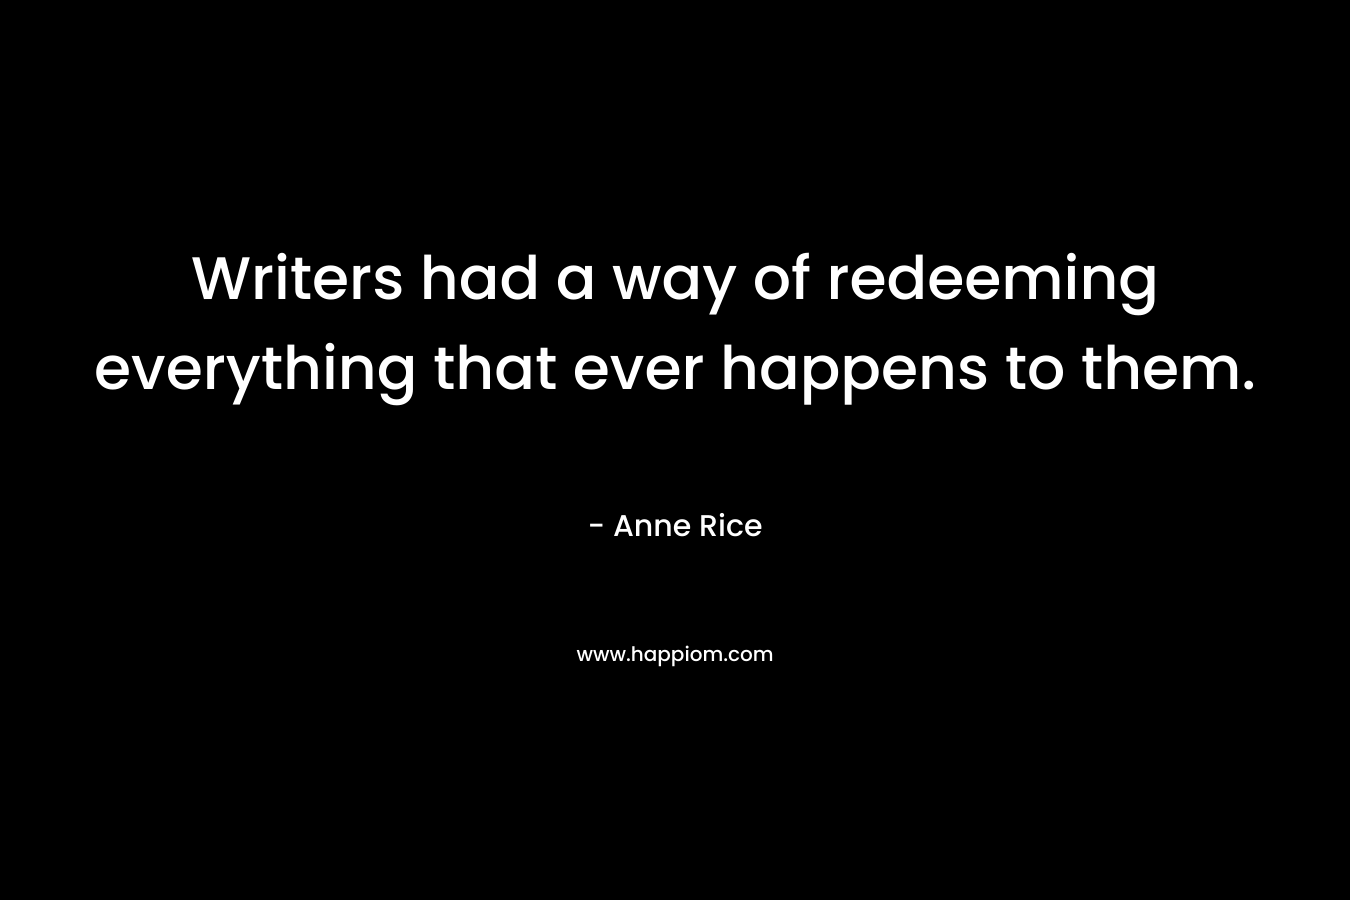 Writers had a way of redeeming everything that ever happens to them.